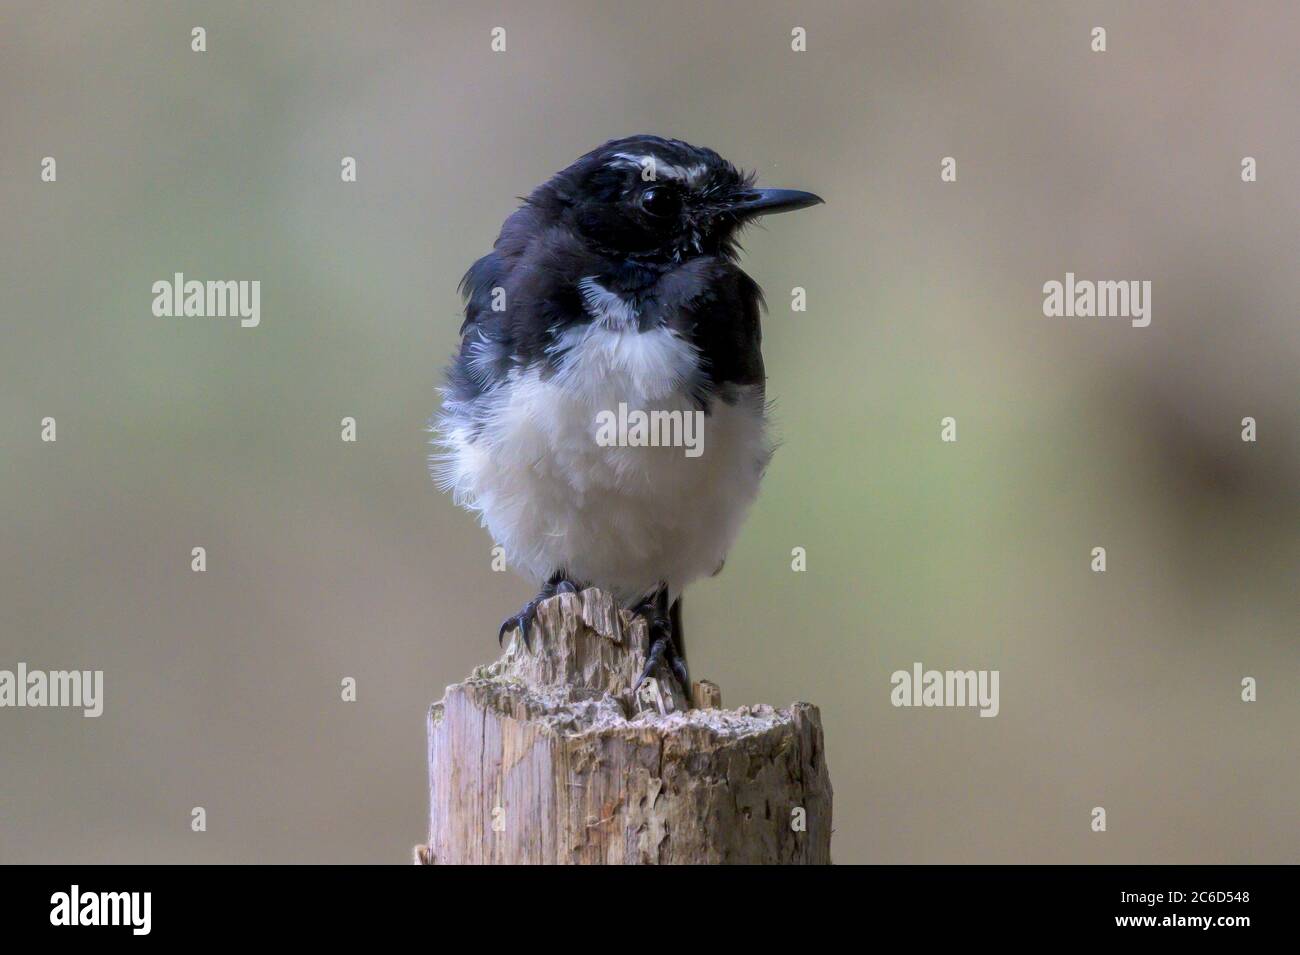 Willie Wagtail bird facing front on standing on a tree stump Stock Photo